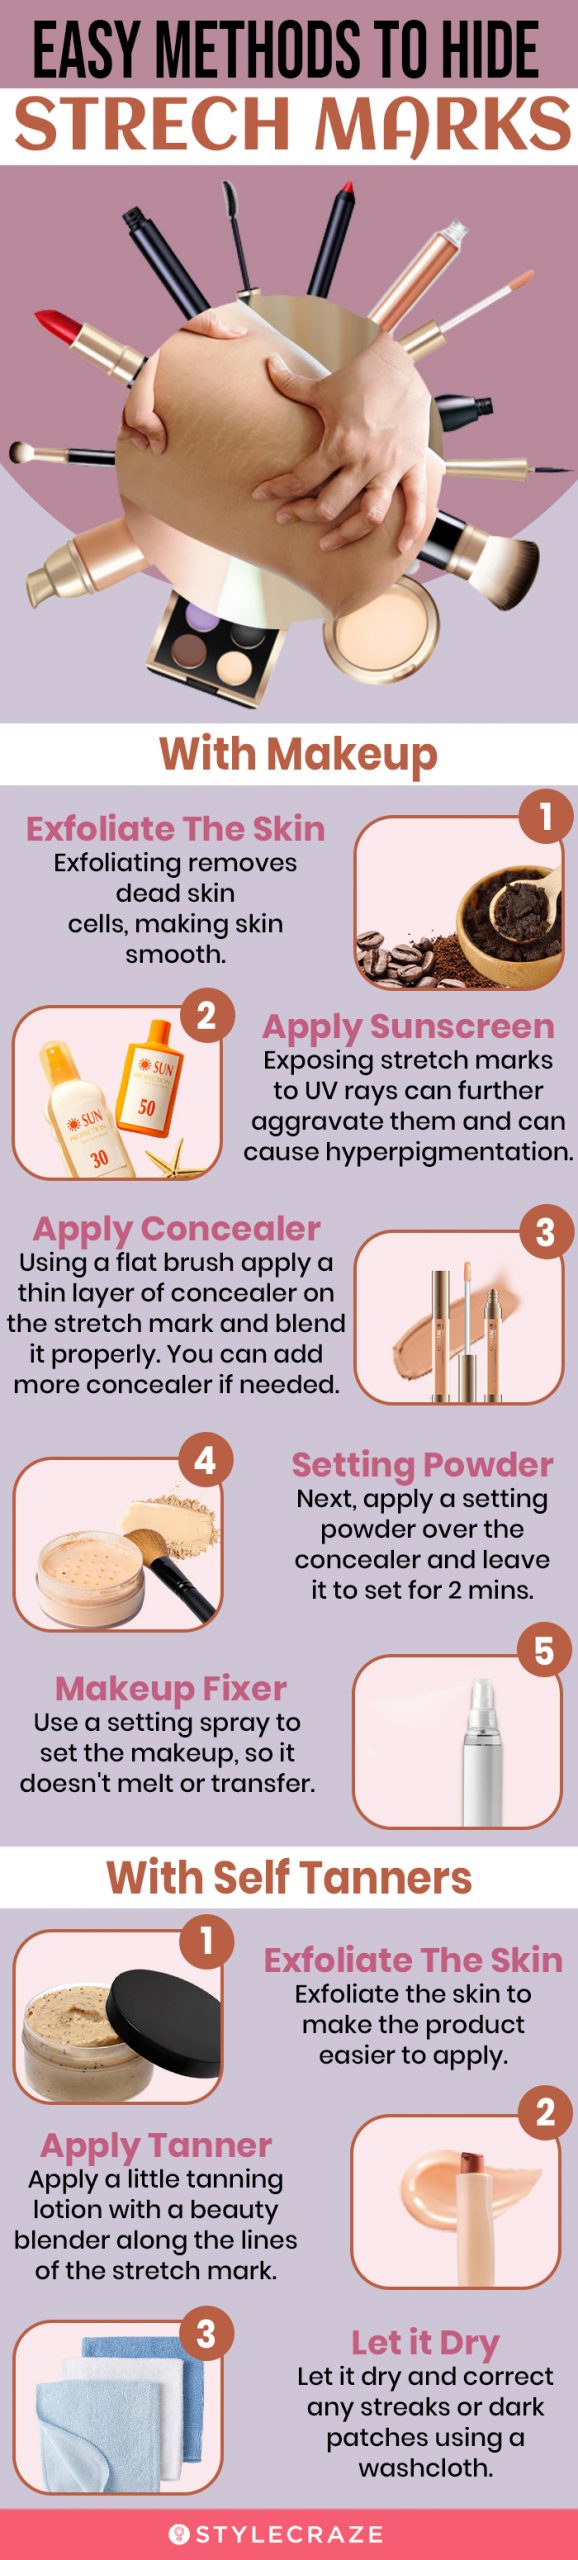 easy methods to hide stretch marks (infographic)